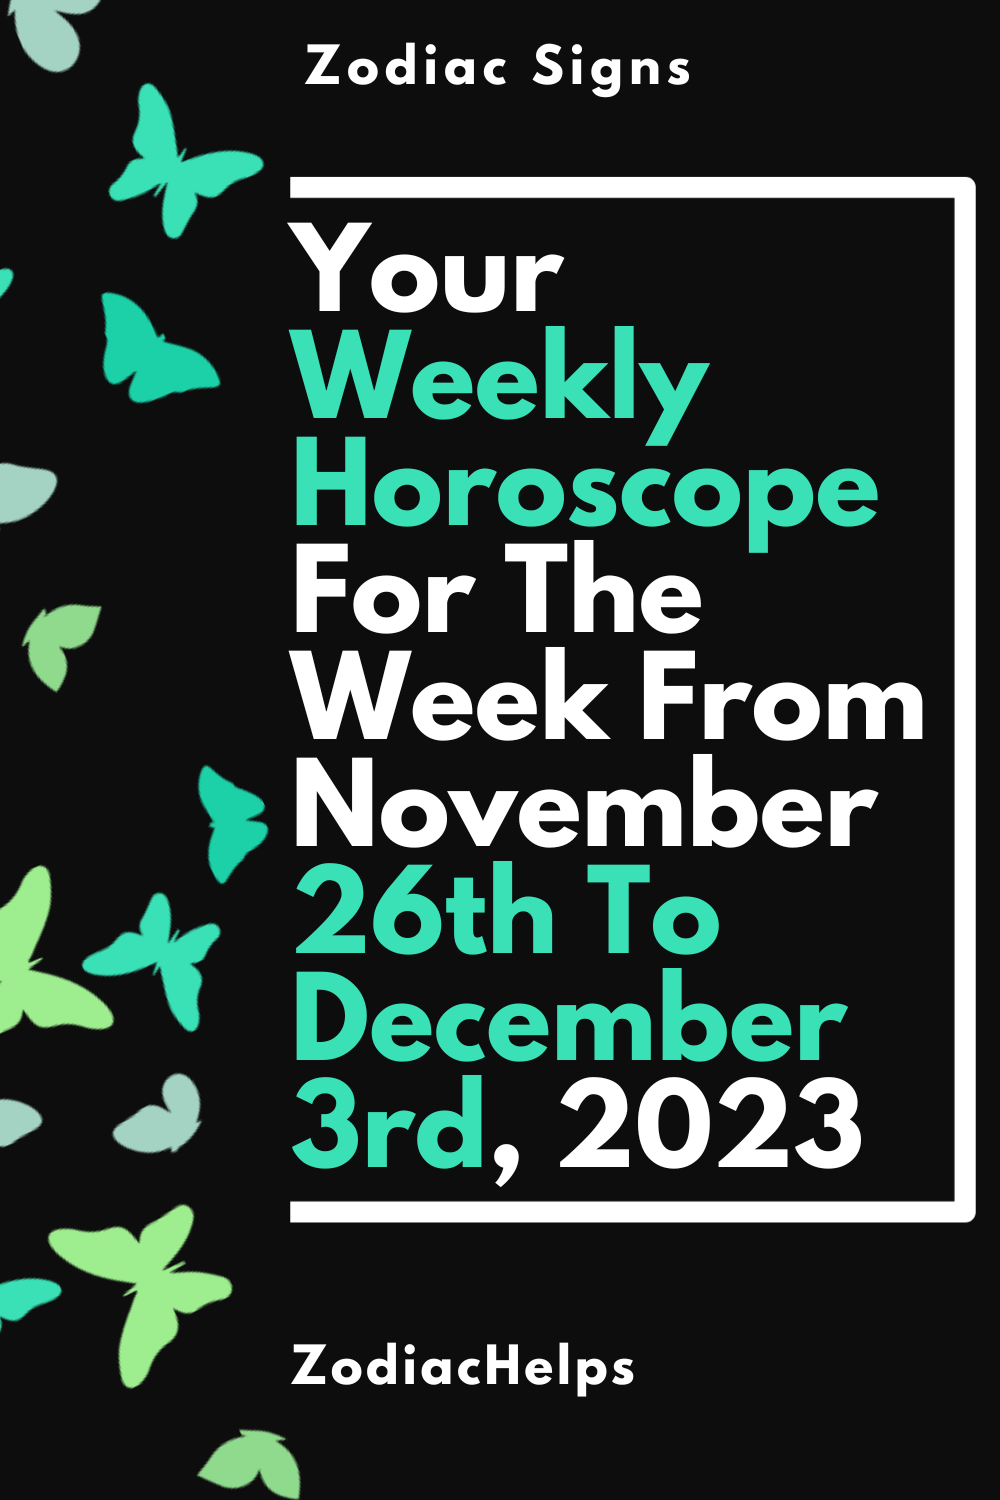 Your Weekly Horoscope For The Week From November 26th To December 3rd, 2023